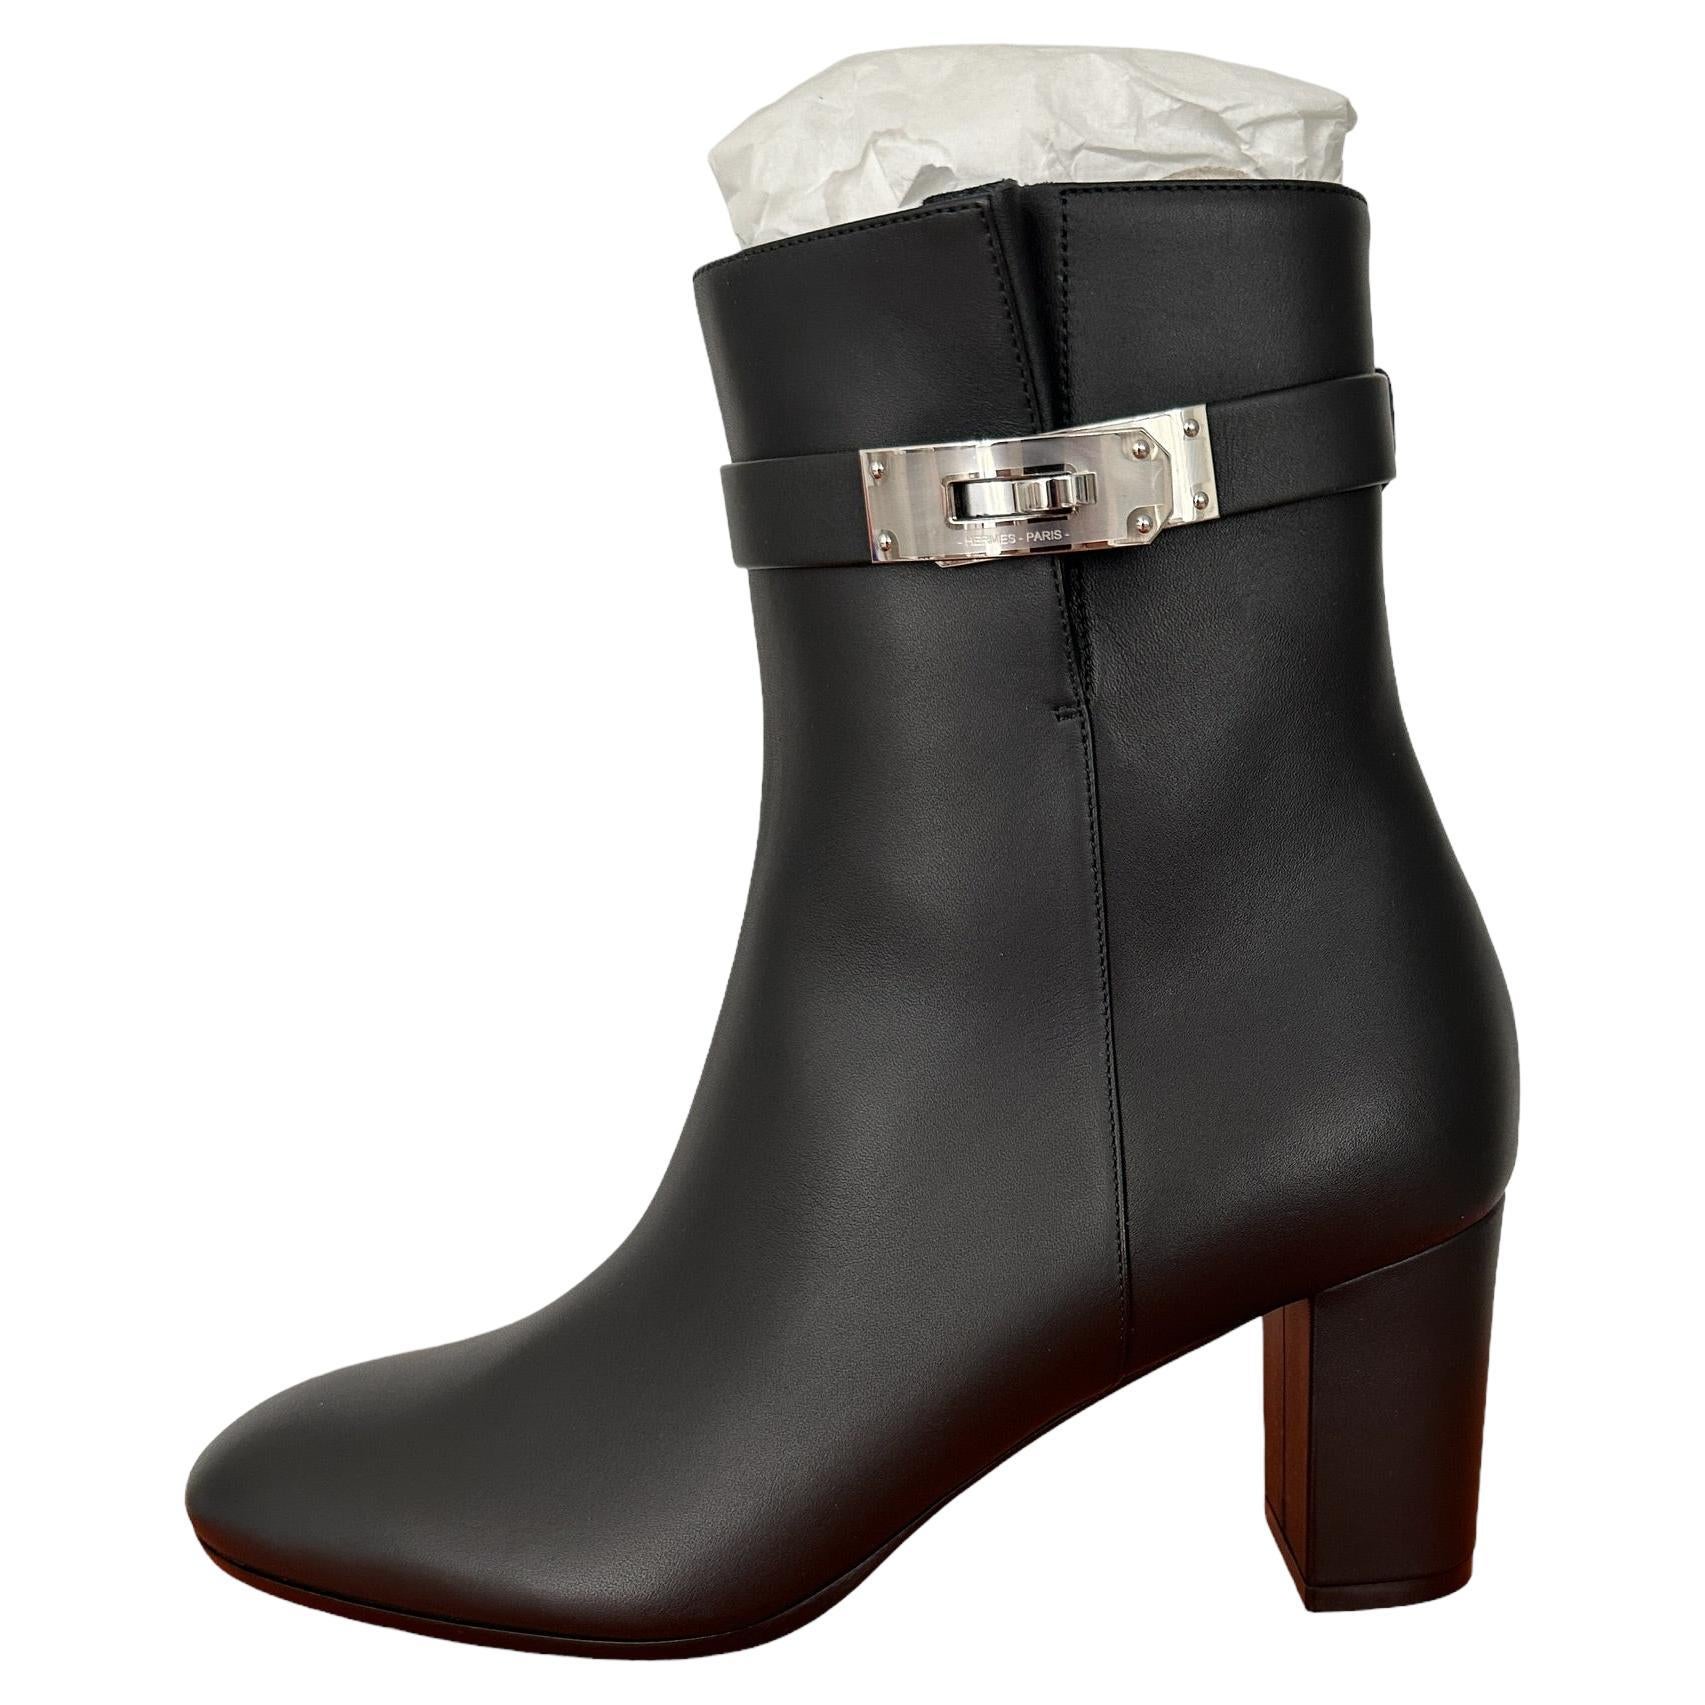 Hermes Boots Saint Germain Ankle Boot Black 40 Kelly Buckle $2000 retail For Sale